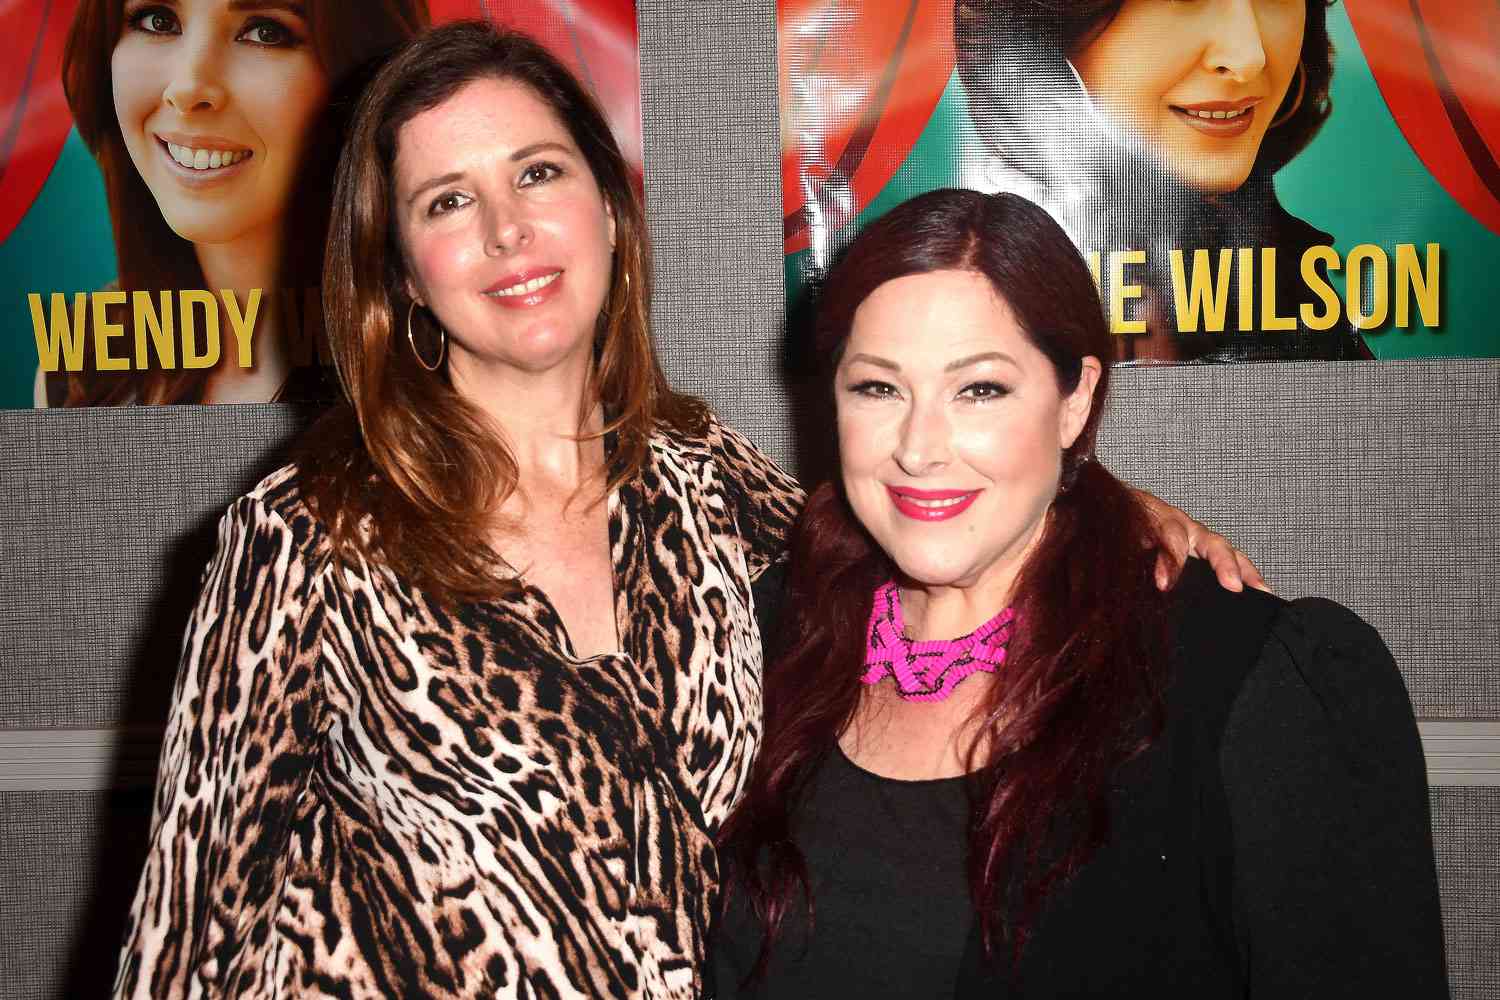 Brian Wilson’s Daughters Say He’s ‘Doing Great’ as Beach Boys Documentary Launches [Video]